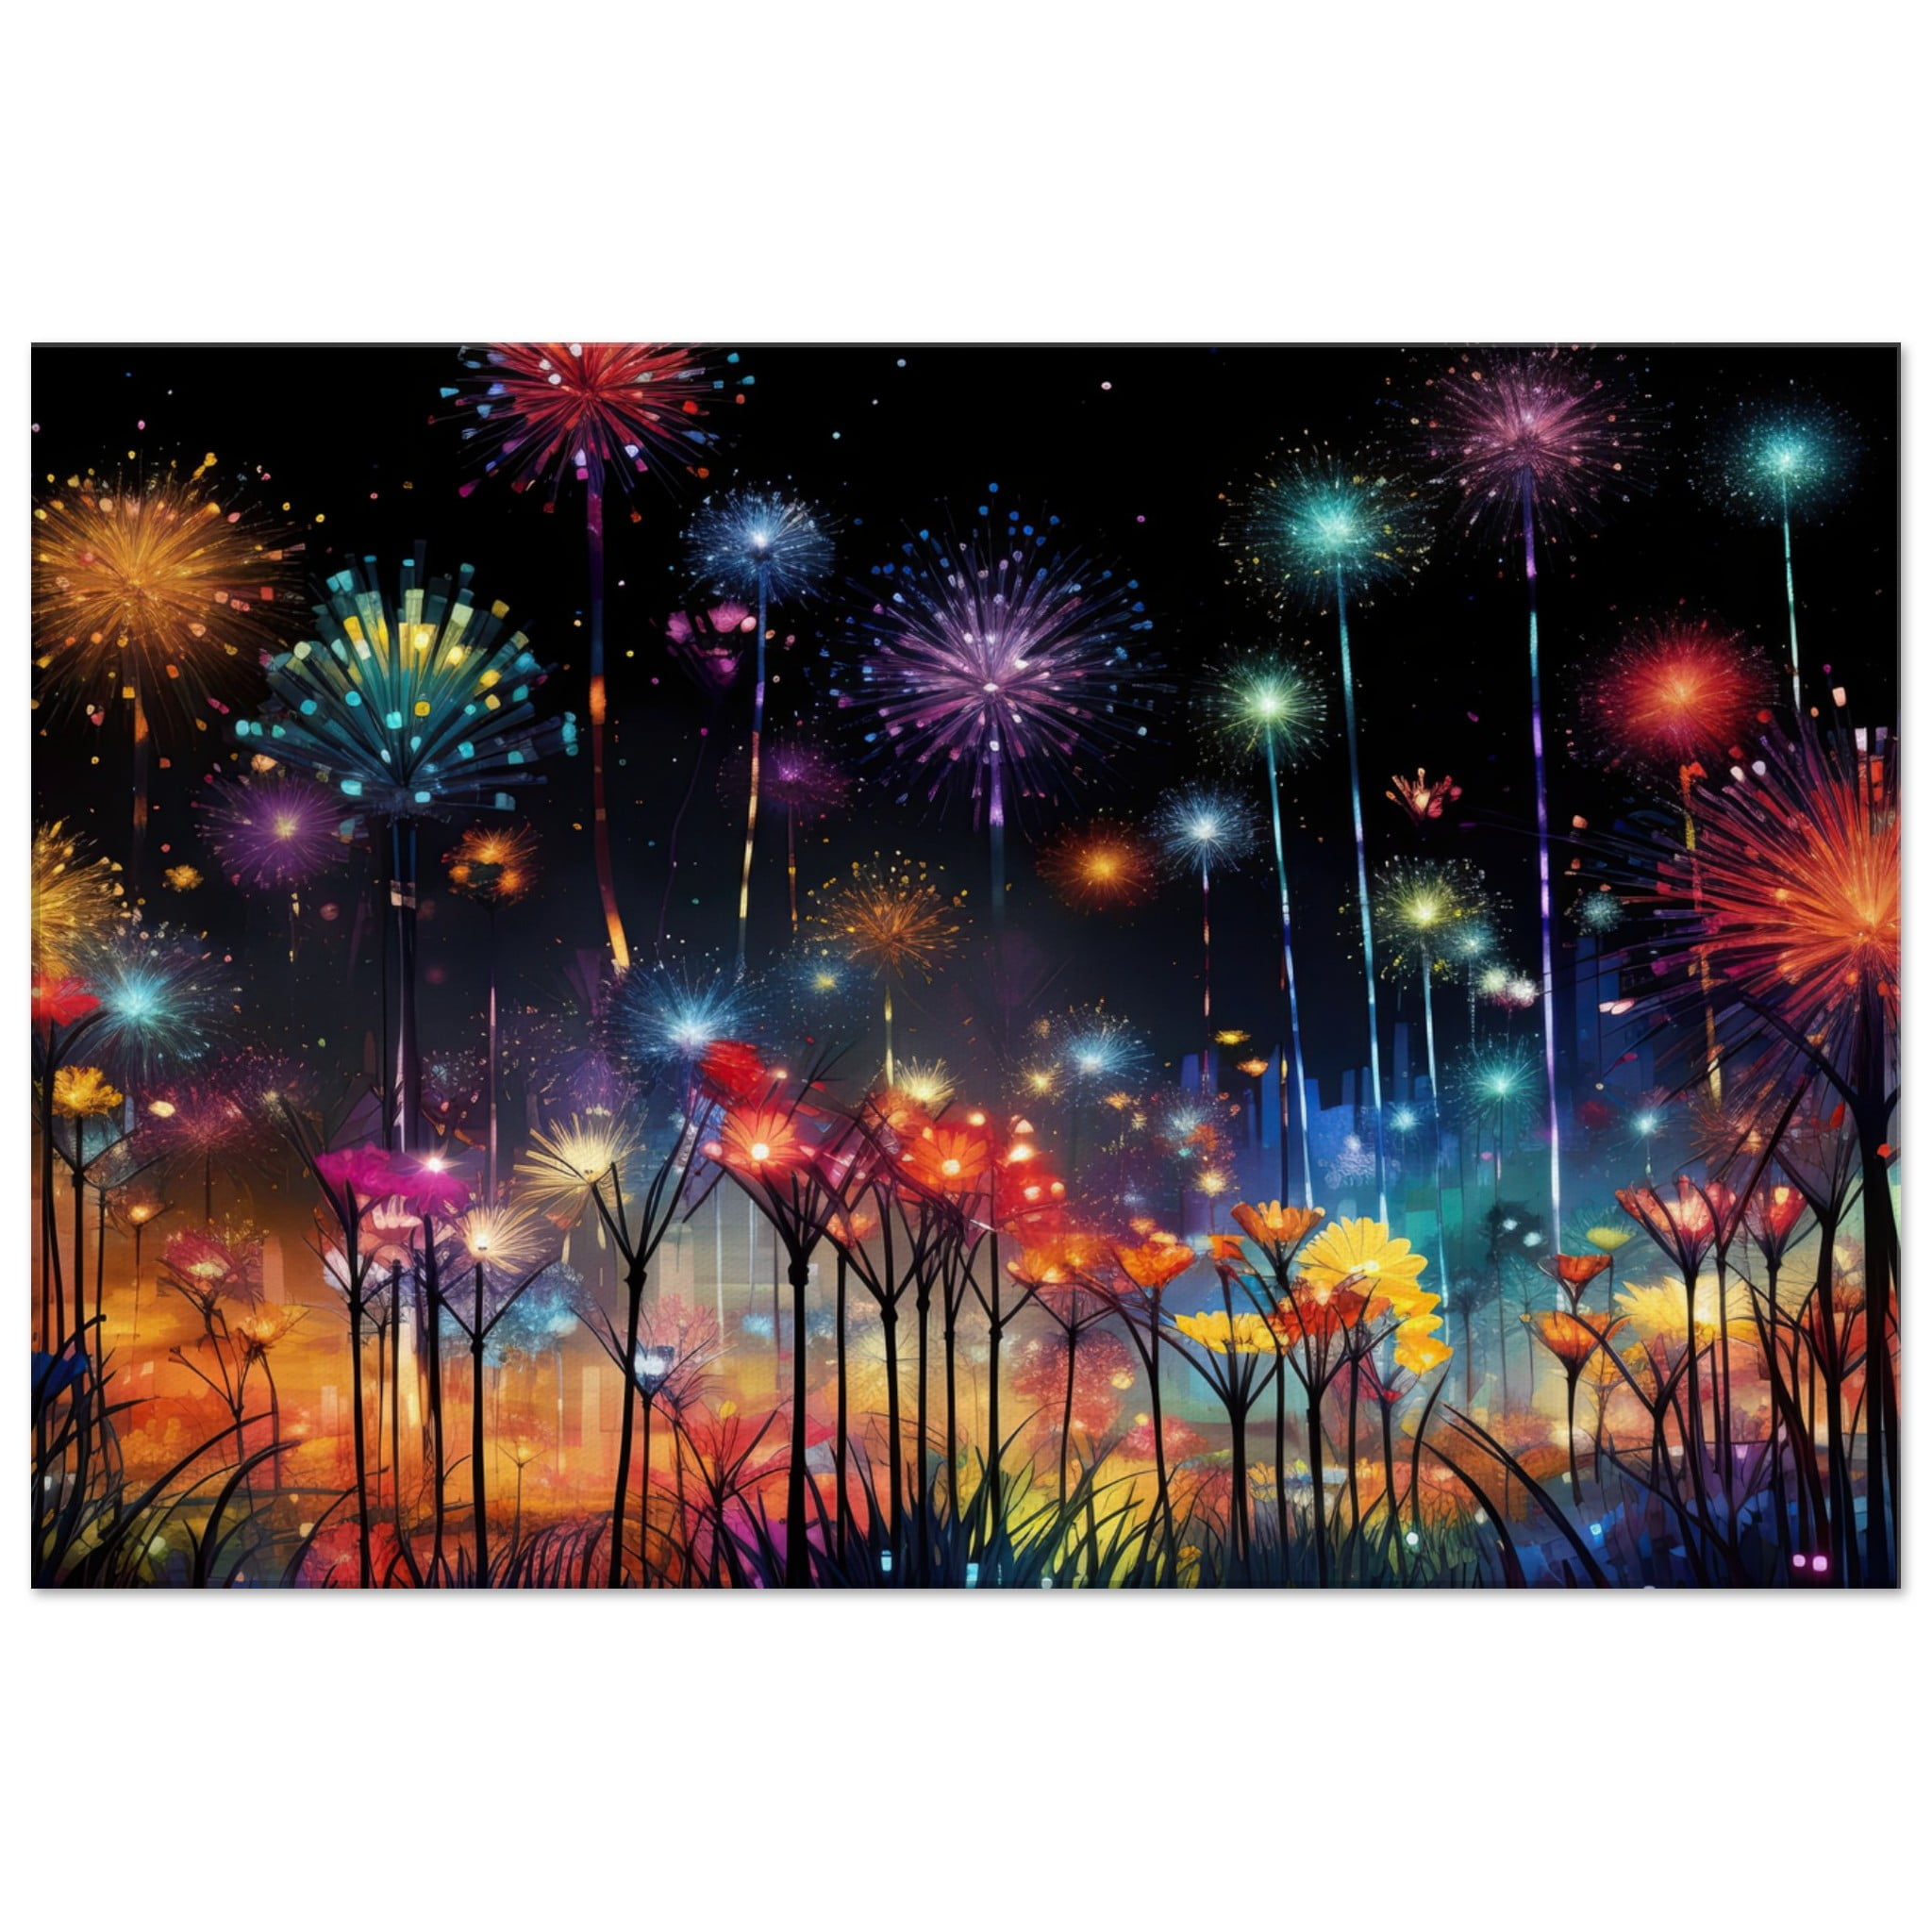 Fireworks and Flowers of Light and Color – Art Canvas Print